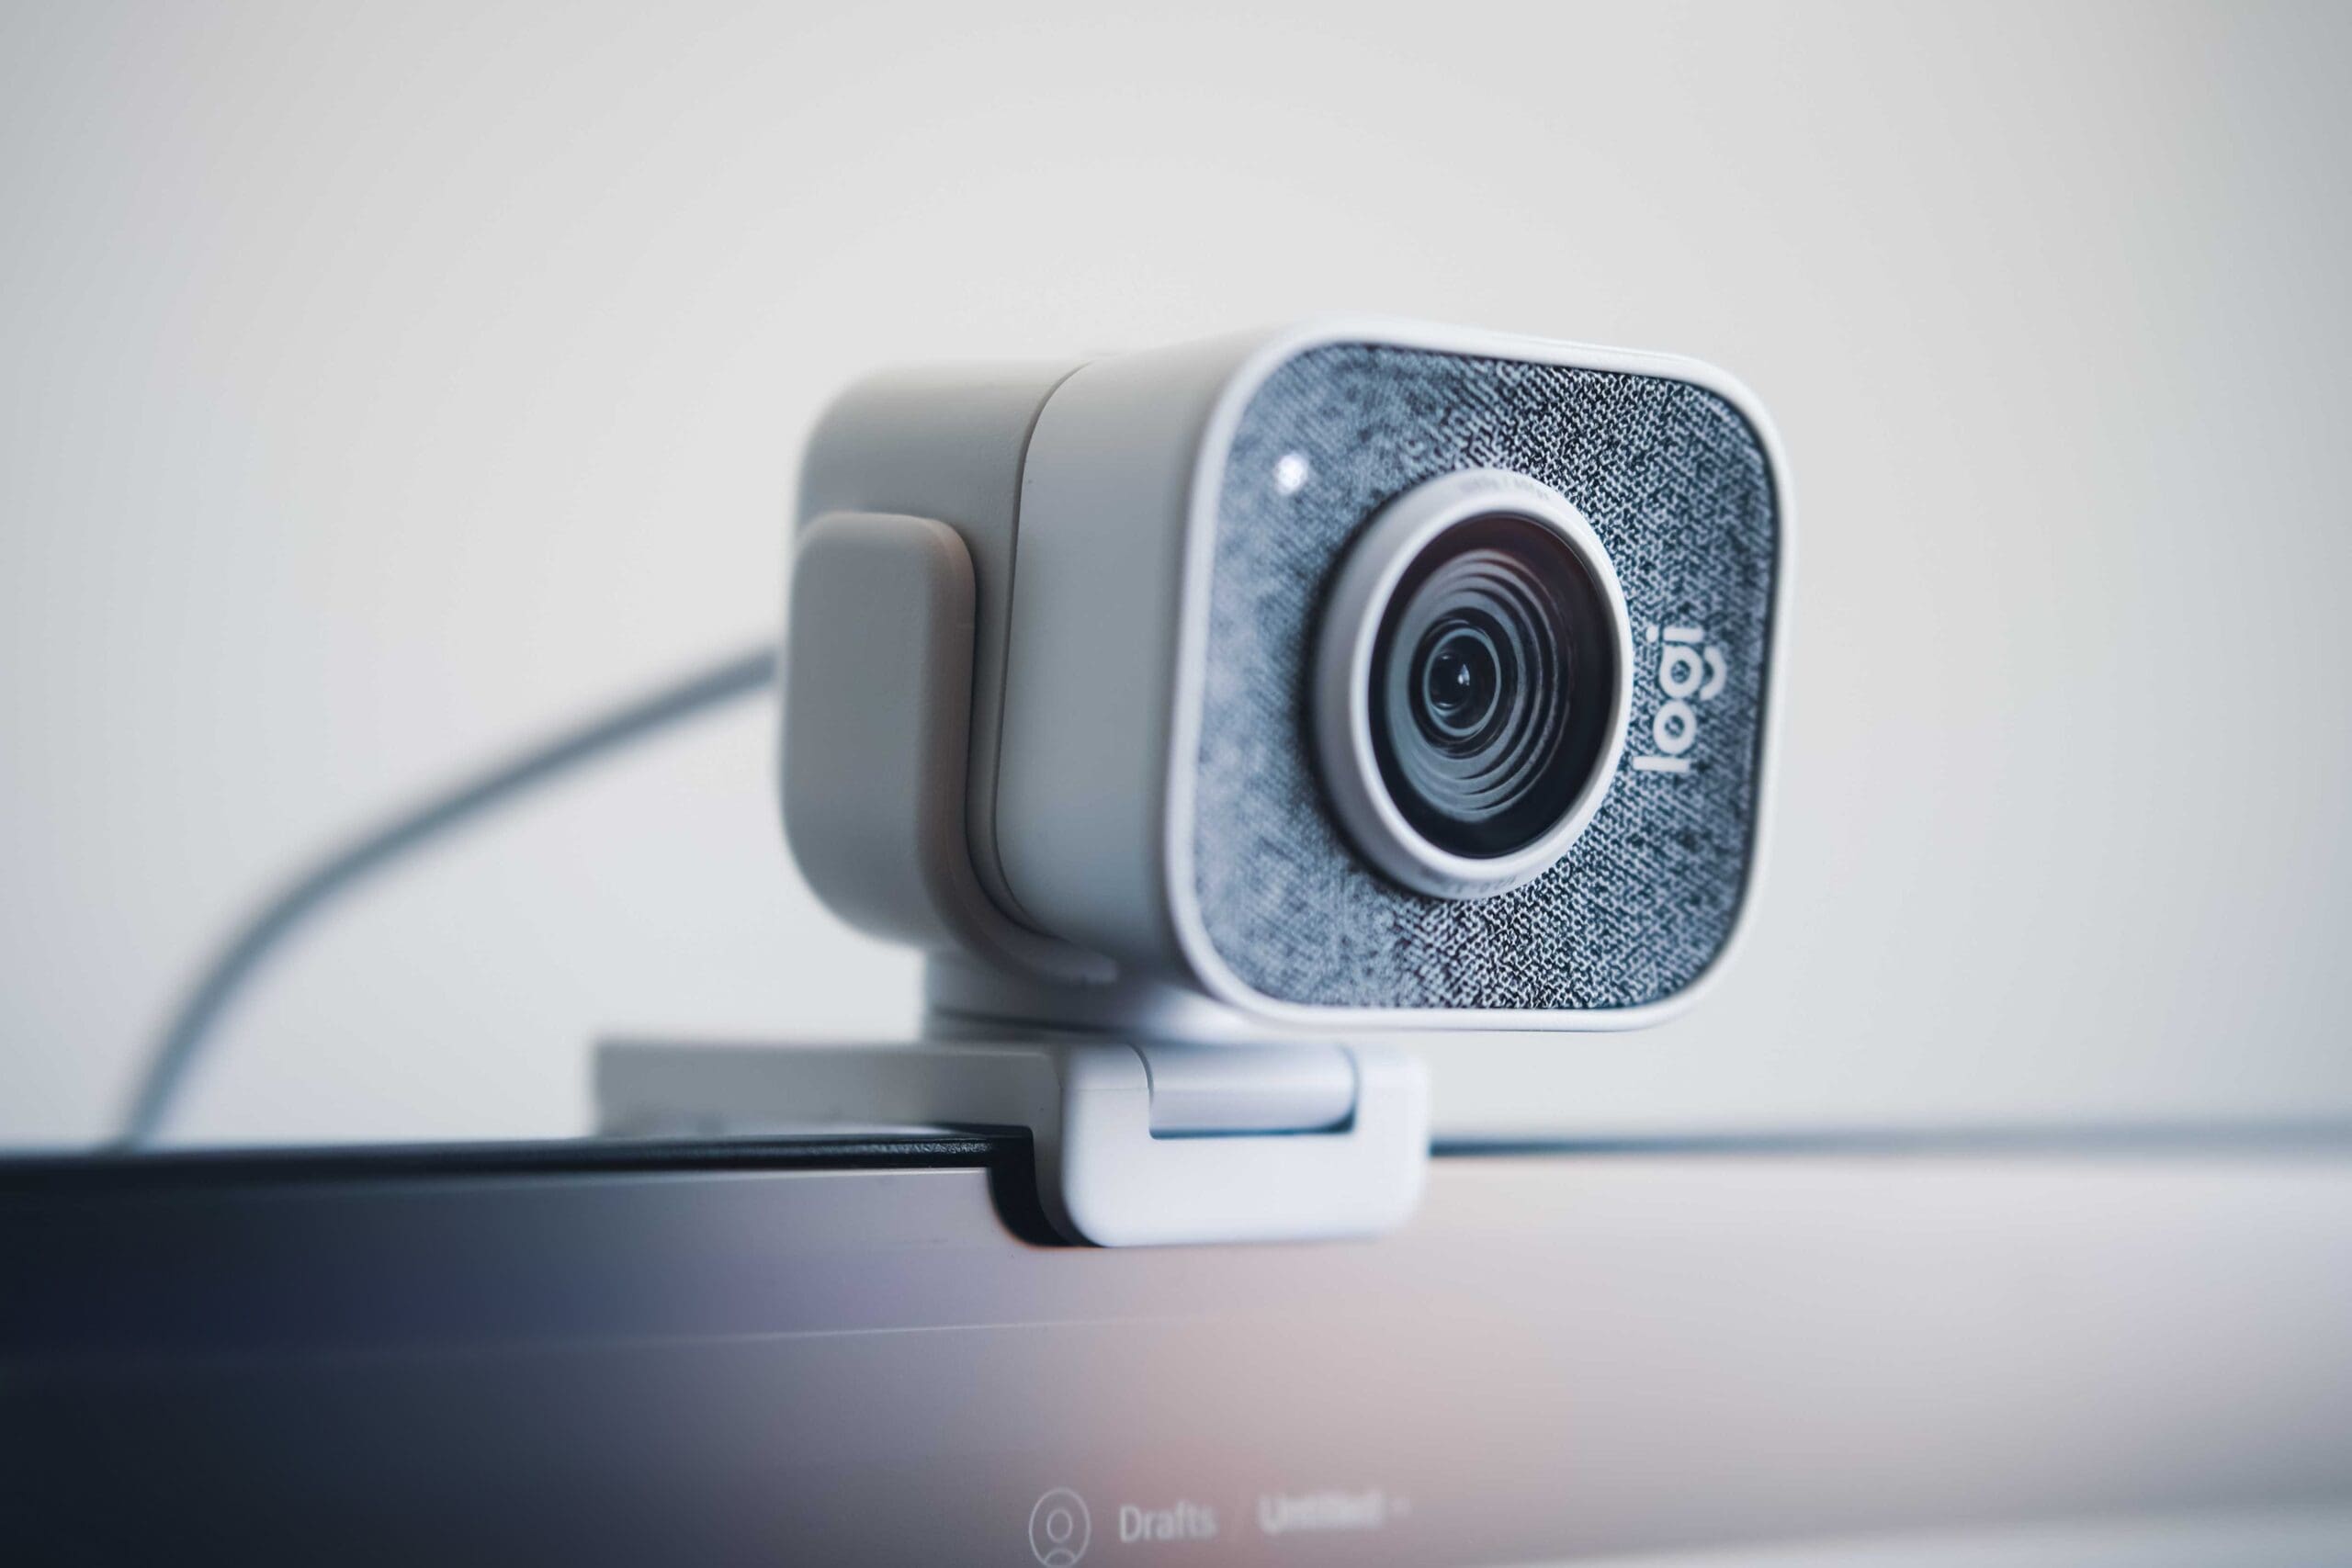 Best Podcast Webcams For Recording Video Podcasts - The